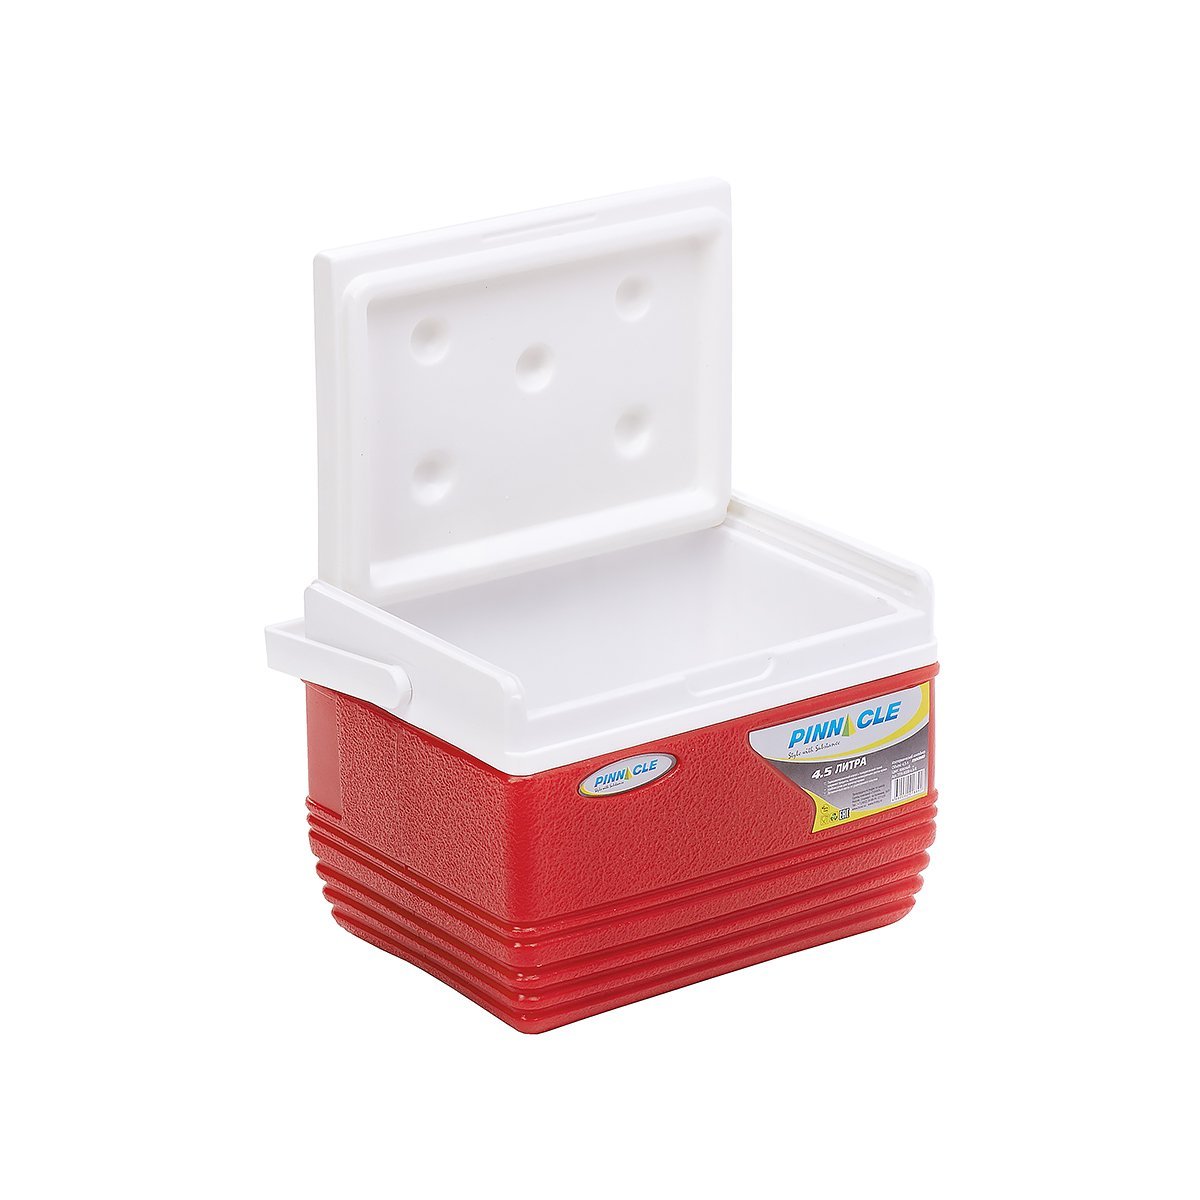 Eskimo Portable Hard-Sided Ice Chest for Camping, 4 qt, Red with a lid widely open